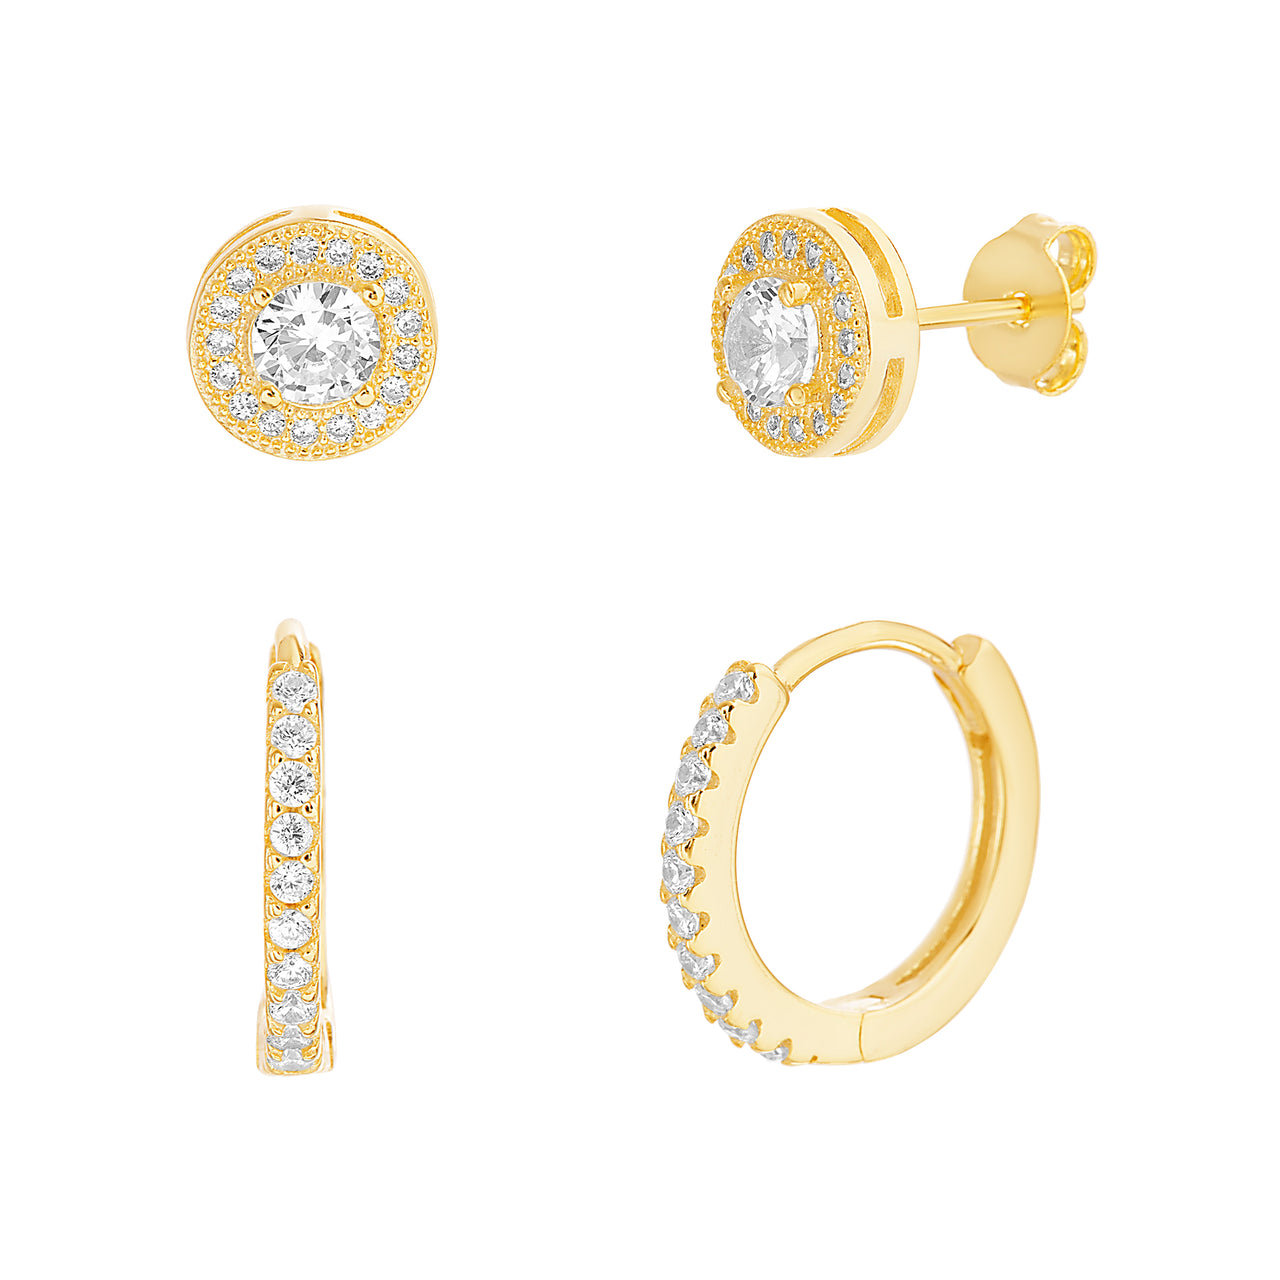 Lesa Michele Yellow Gold Plated Sterling Stud and Hoop Duo Earring Set